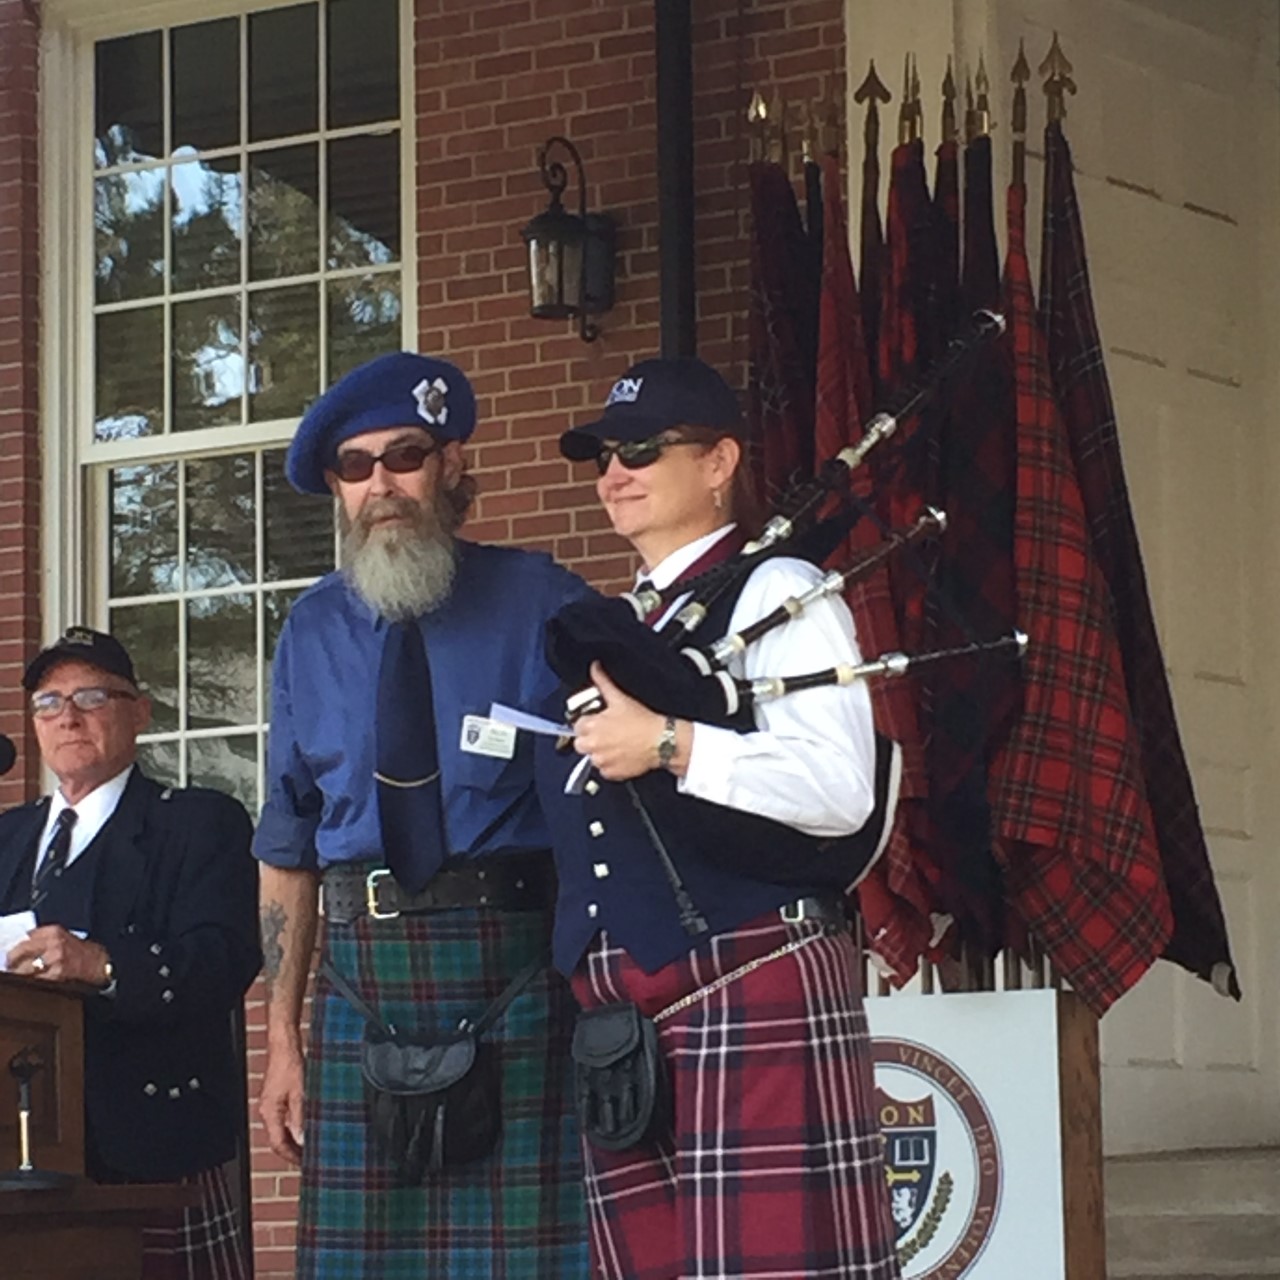 bagpiper being awarded a scholarship